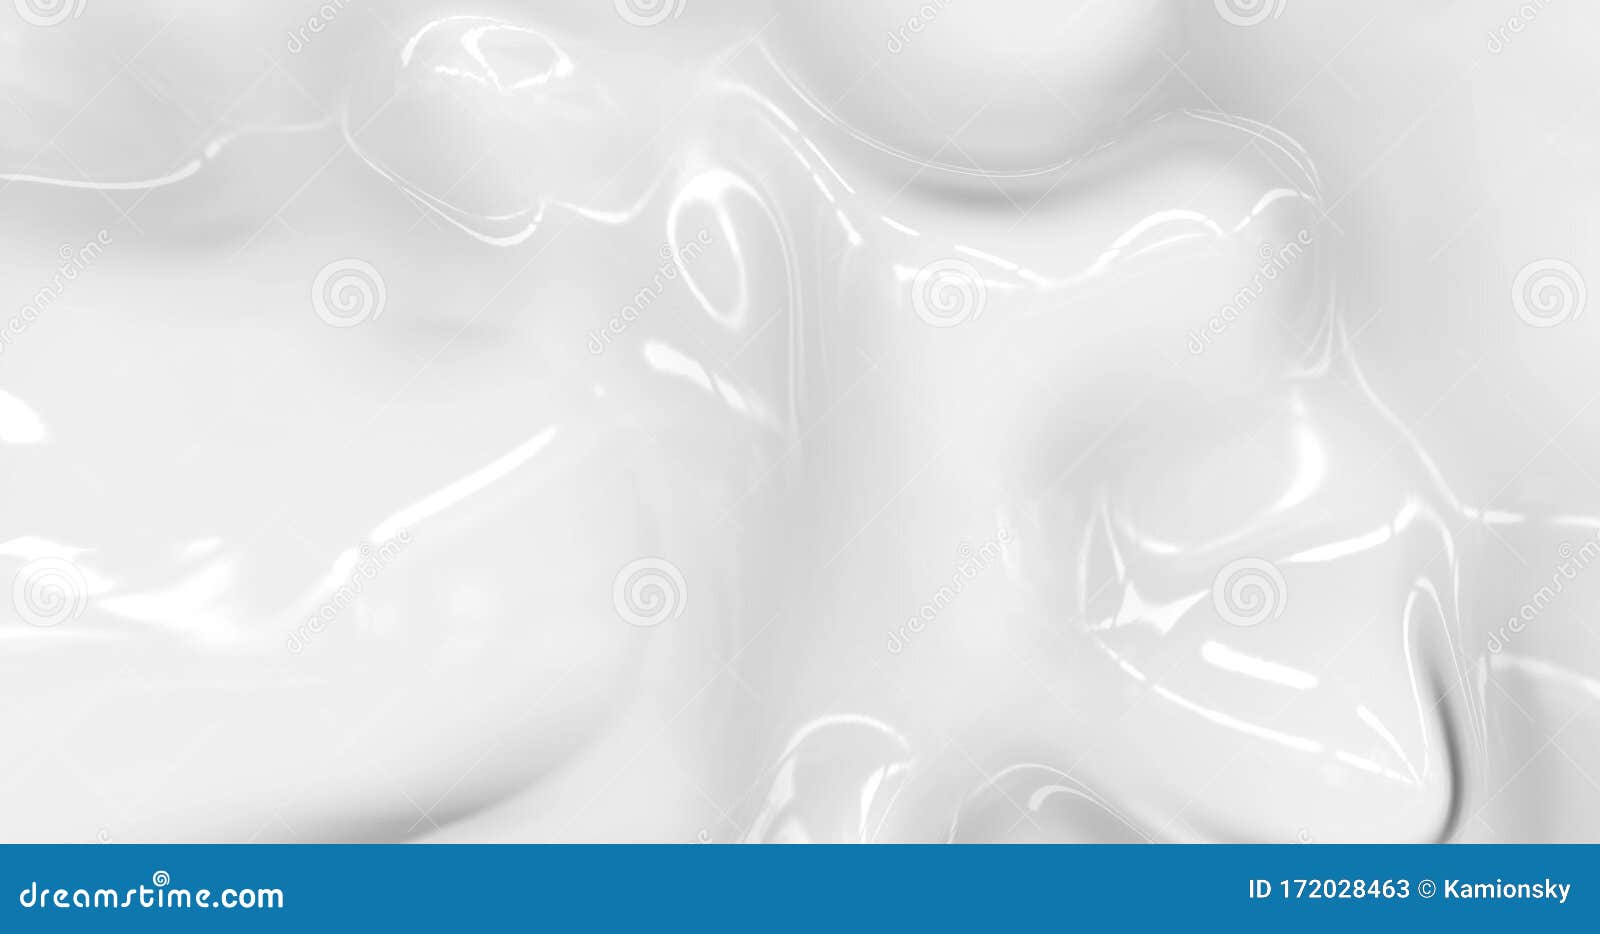 Liquid Abstract White Background. Smooth Glossy Texture 3D Rendering ...